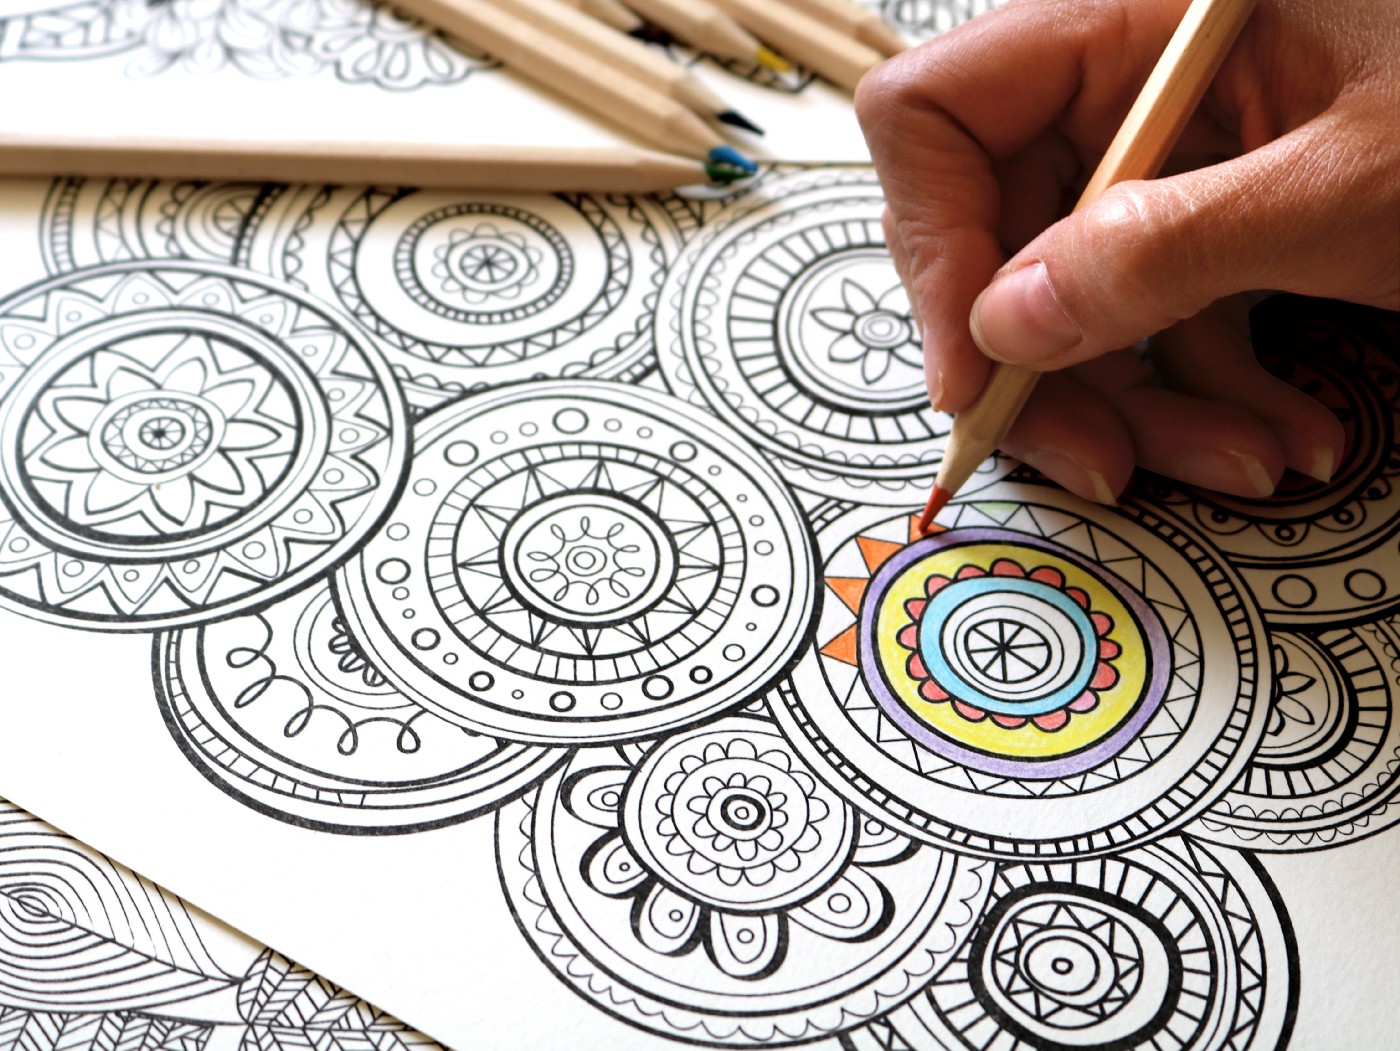 a hand coloring a detailed coloring page of a mandala with pastel colors as various colored pencils lay above